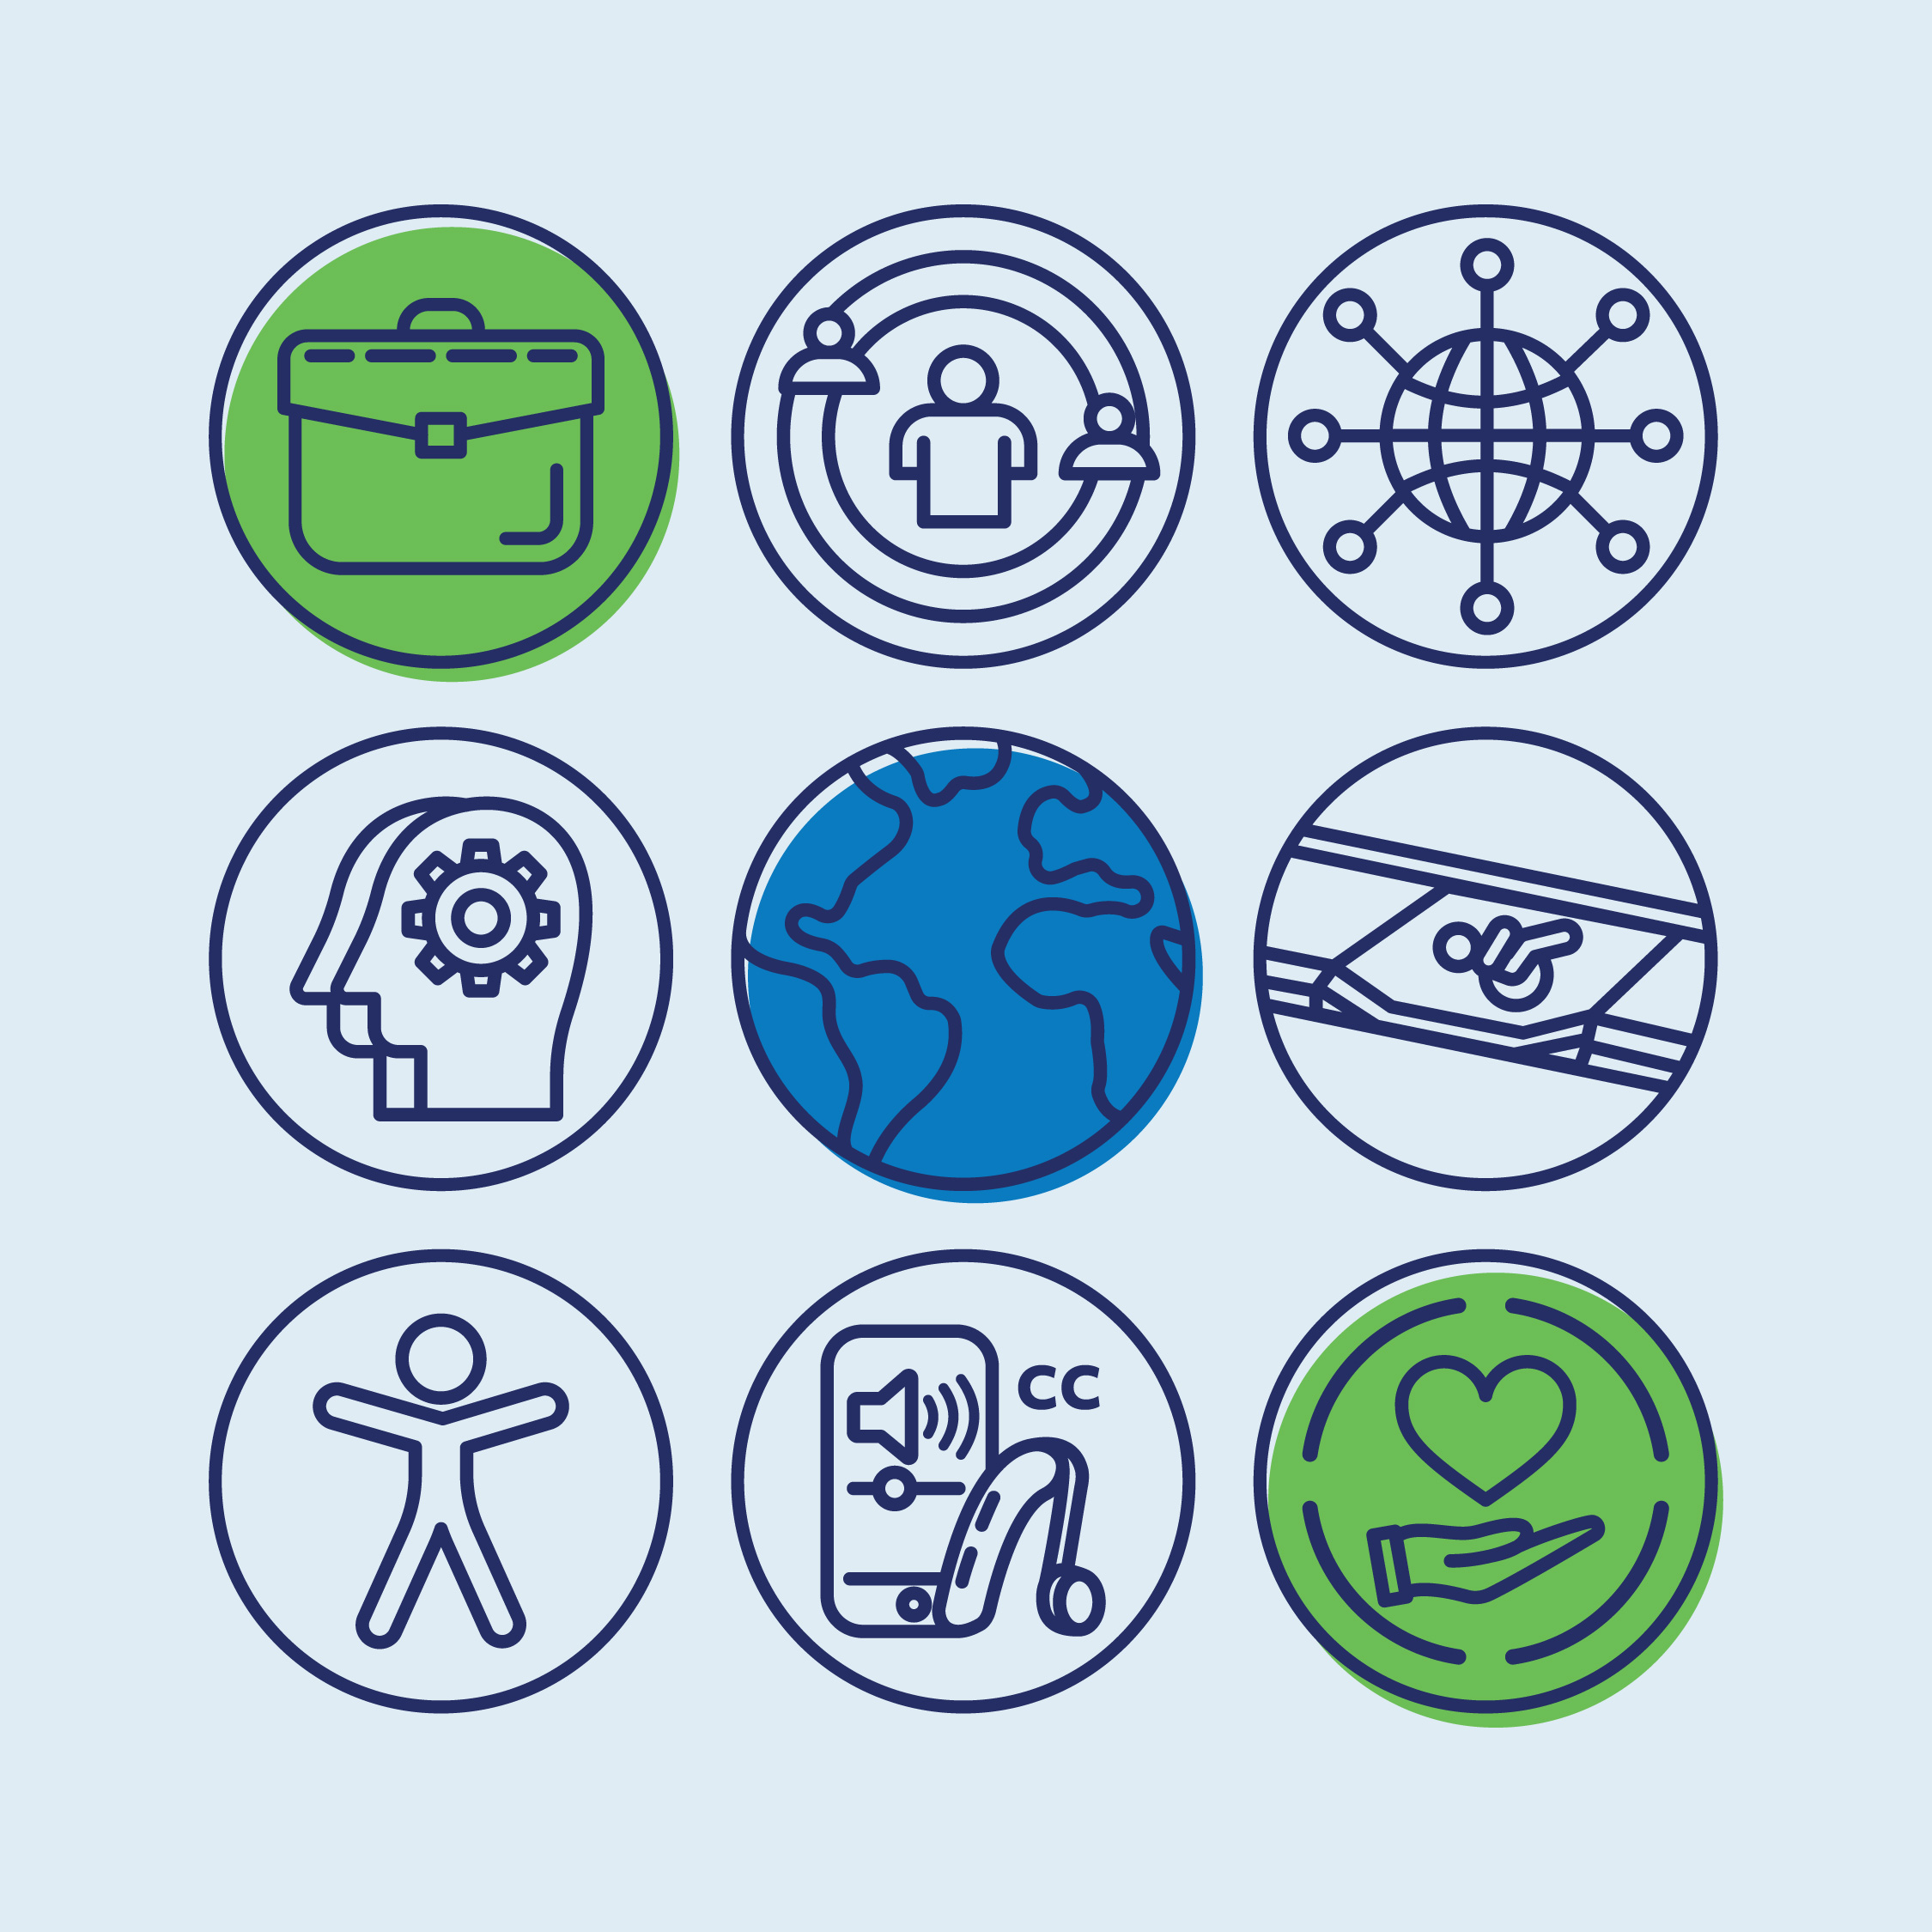 Nine outlined icons representing workplace, disability, accessibility, and network.